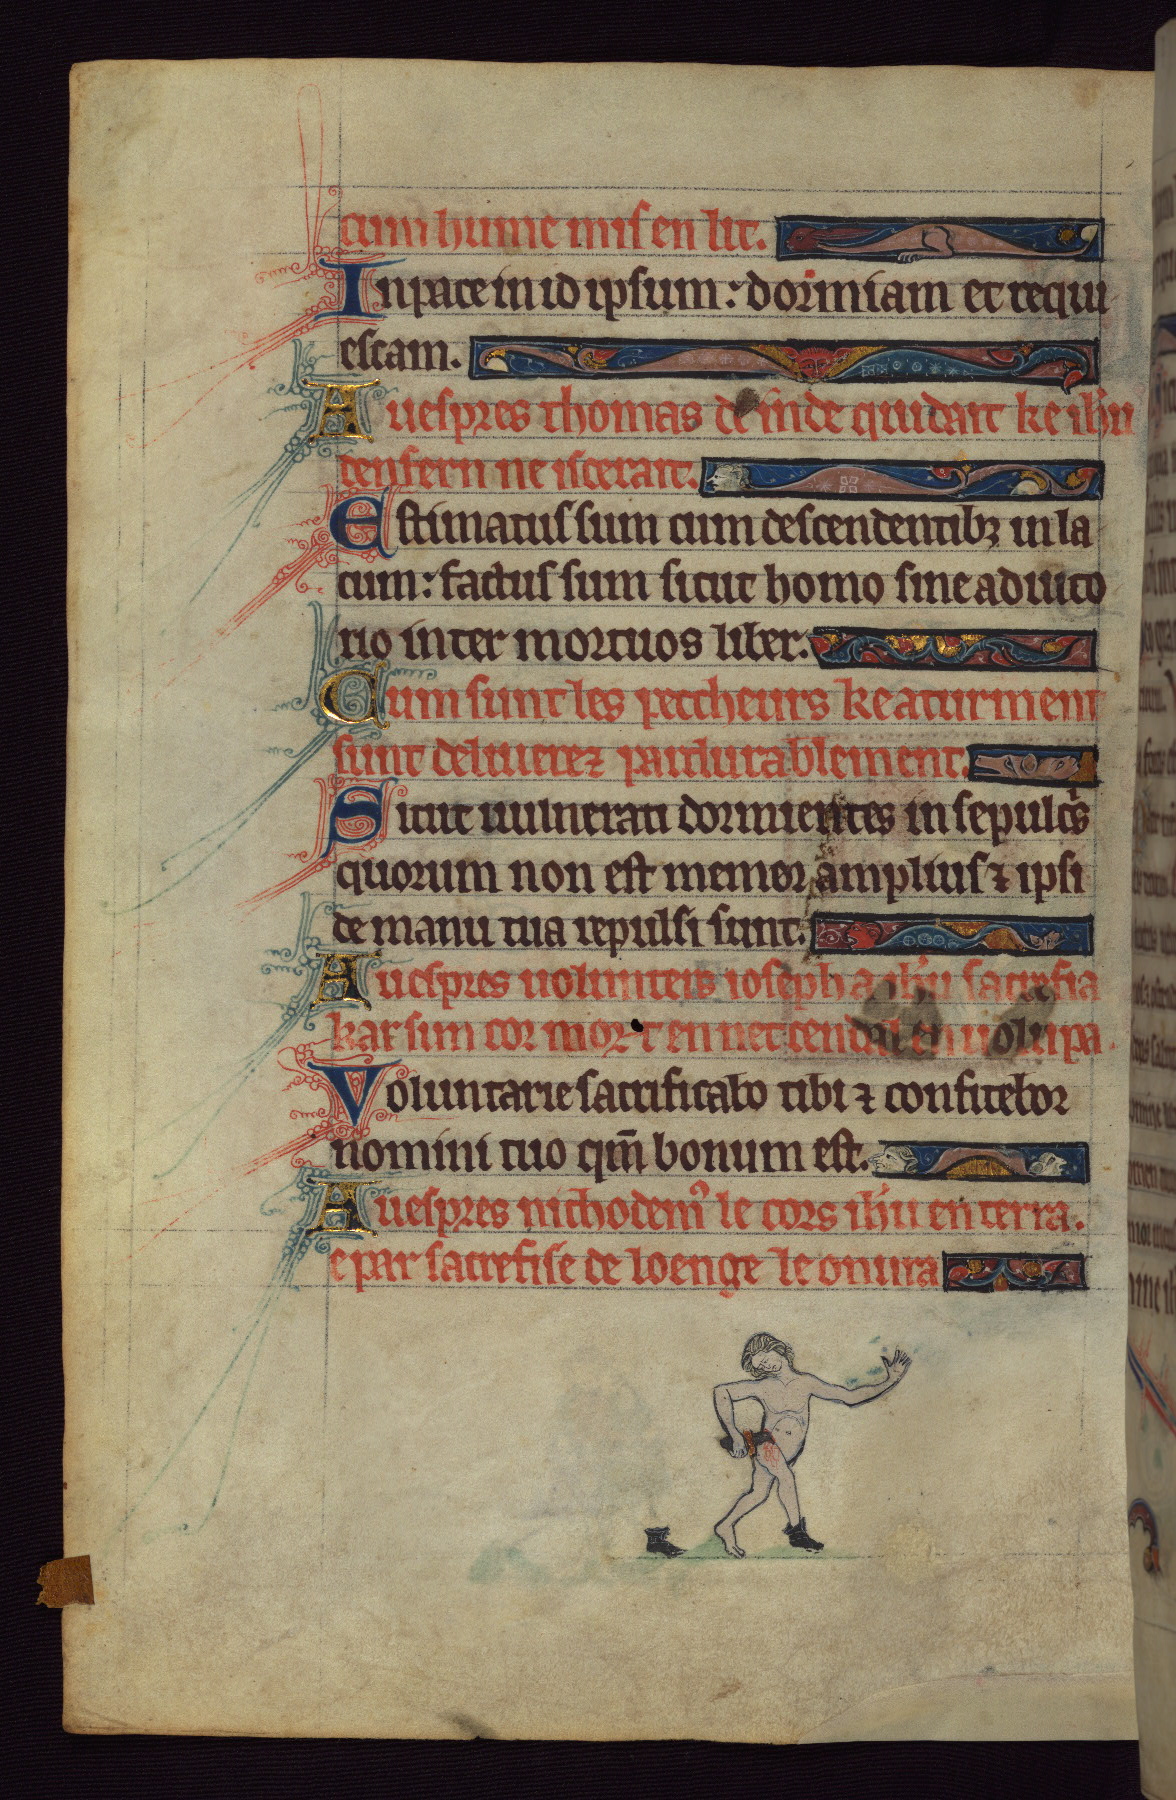 Walters Ms. W.102, Book of hours1176 x 1800